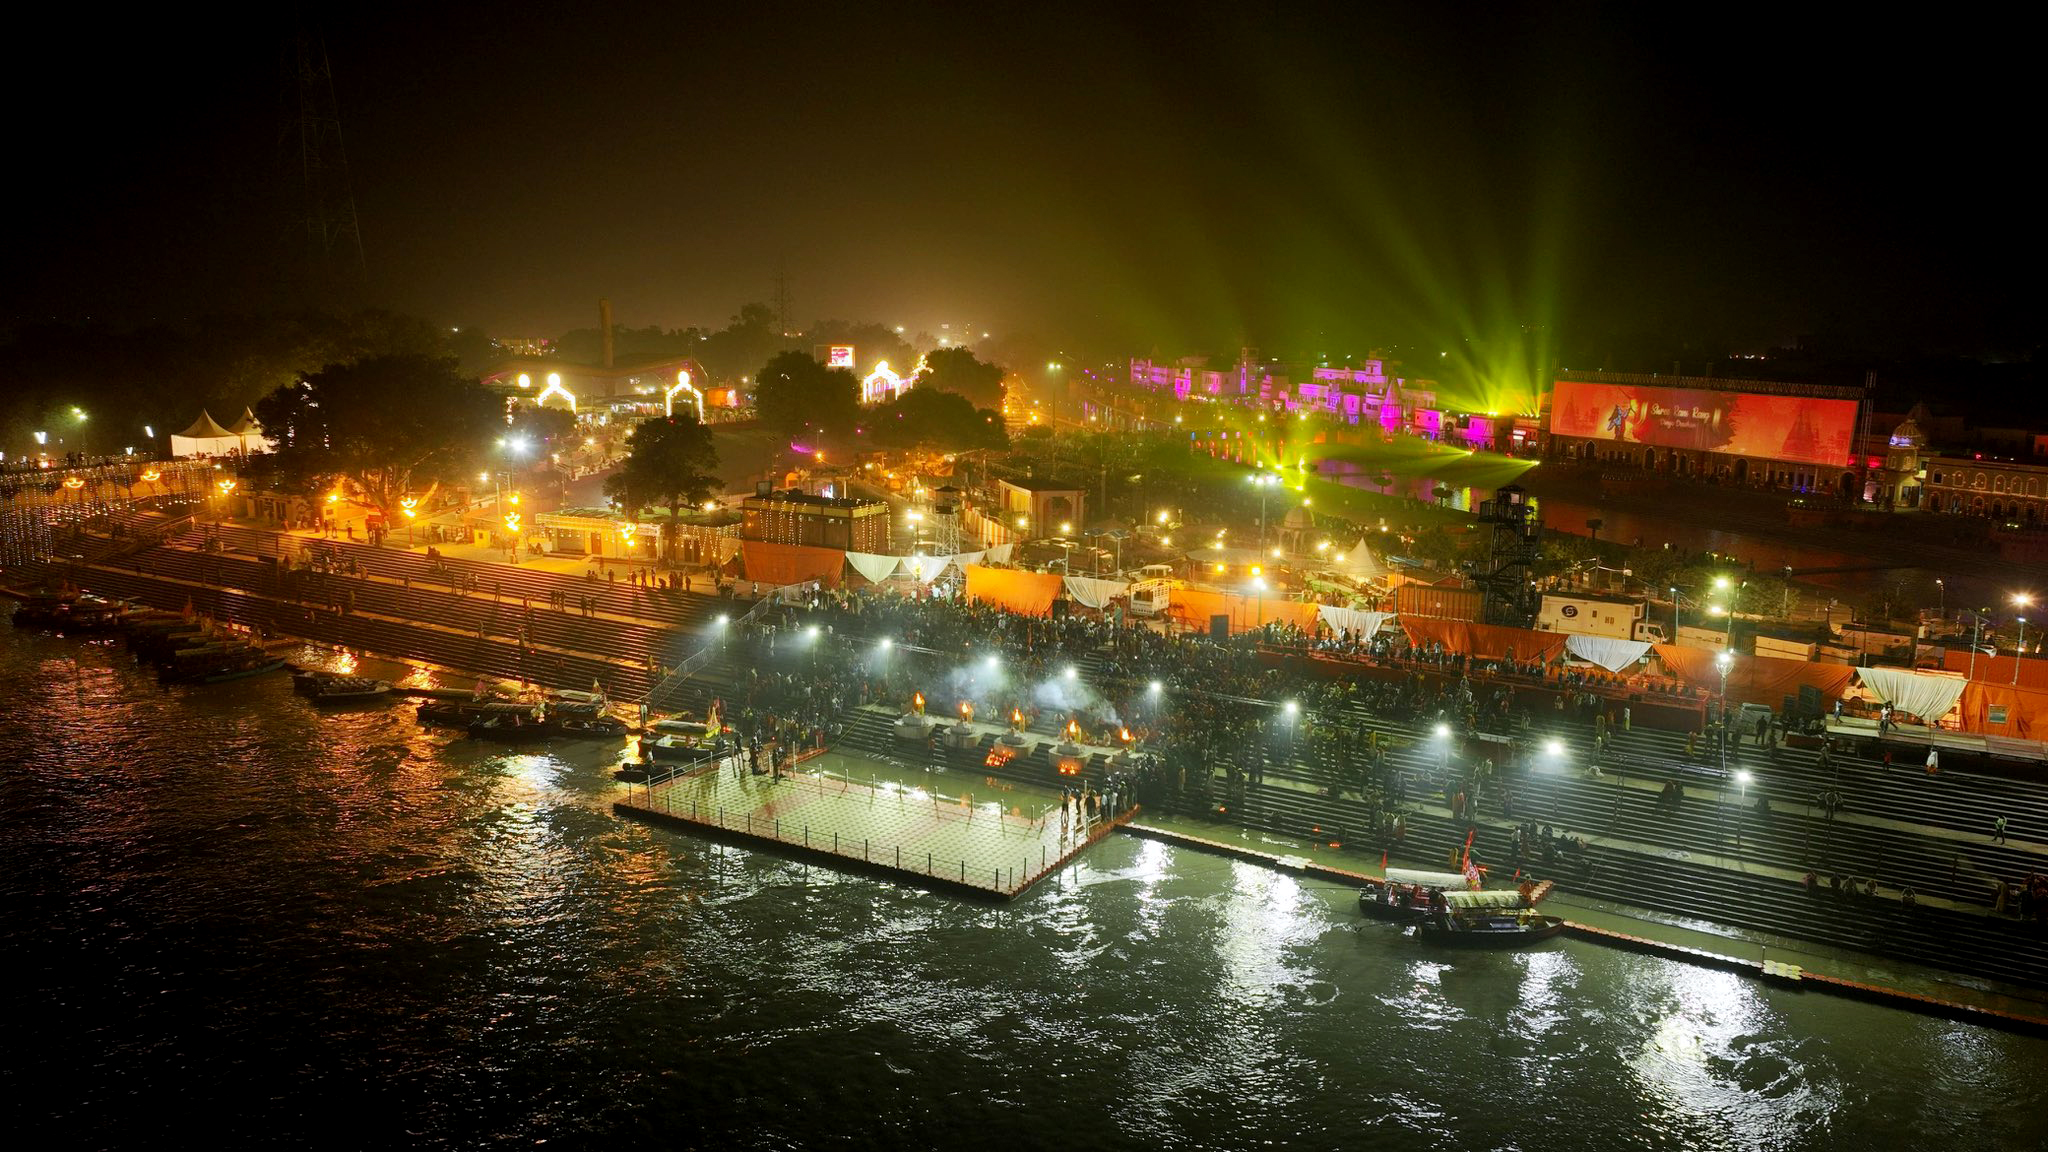 Earthen lamps lit up on the banks of the Saryu river ahead of the Diwali festival